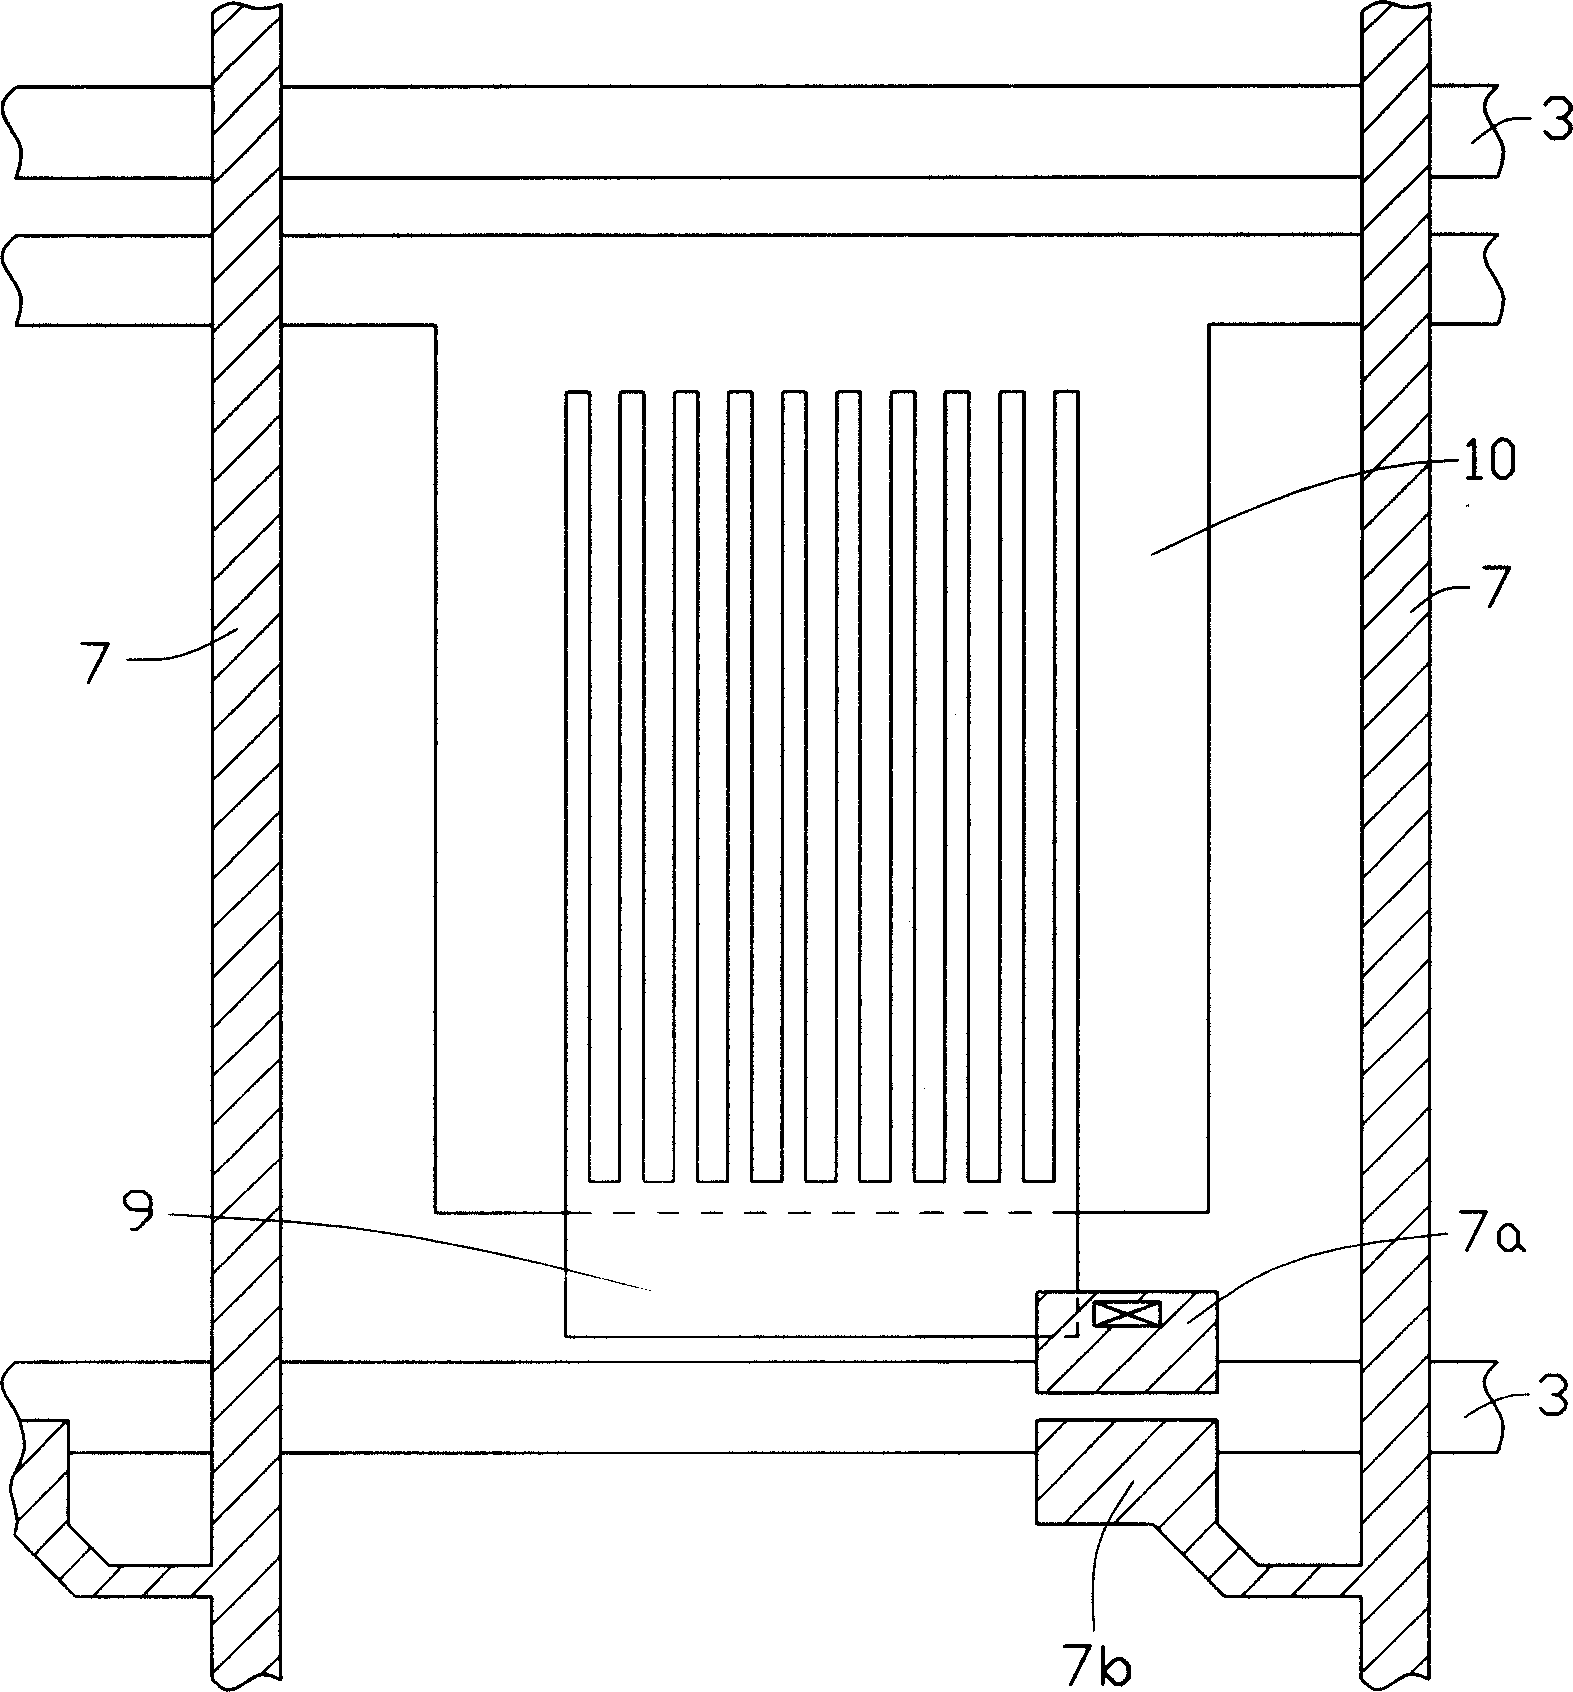 Fringing electric field switch type liquid crystal display unit